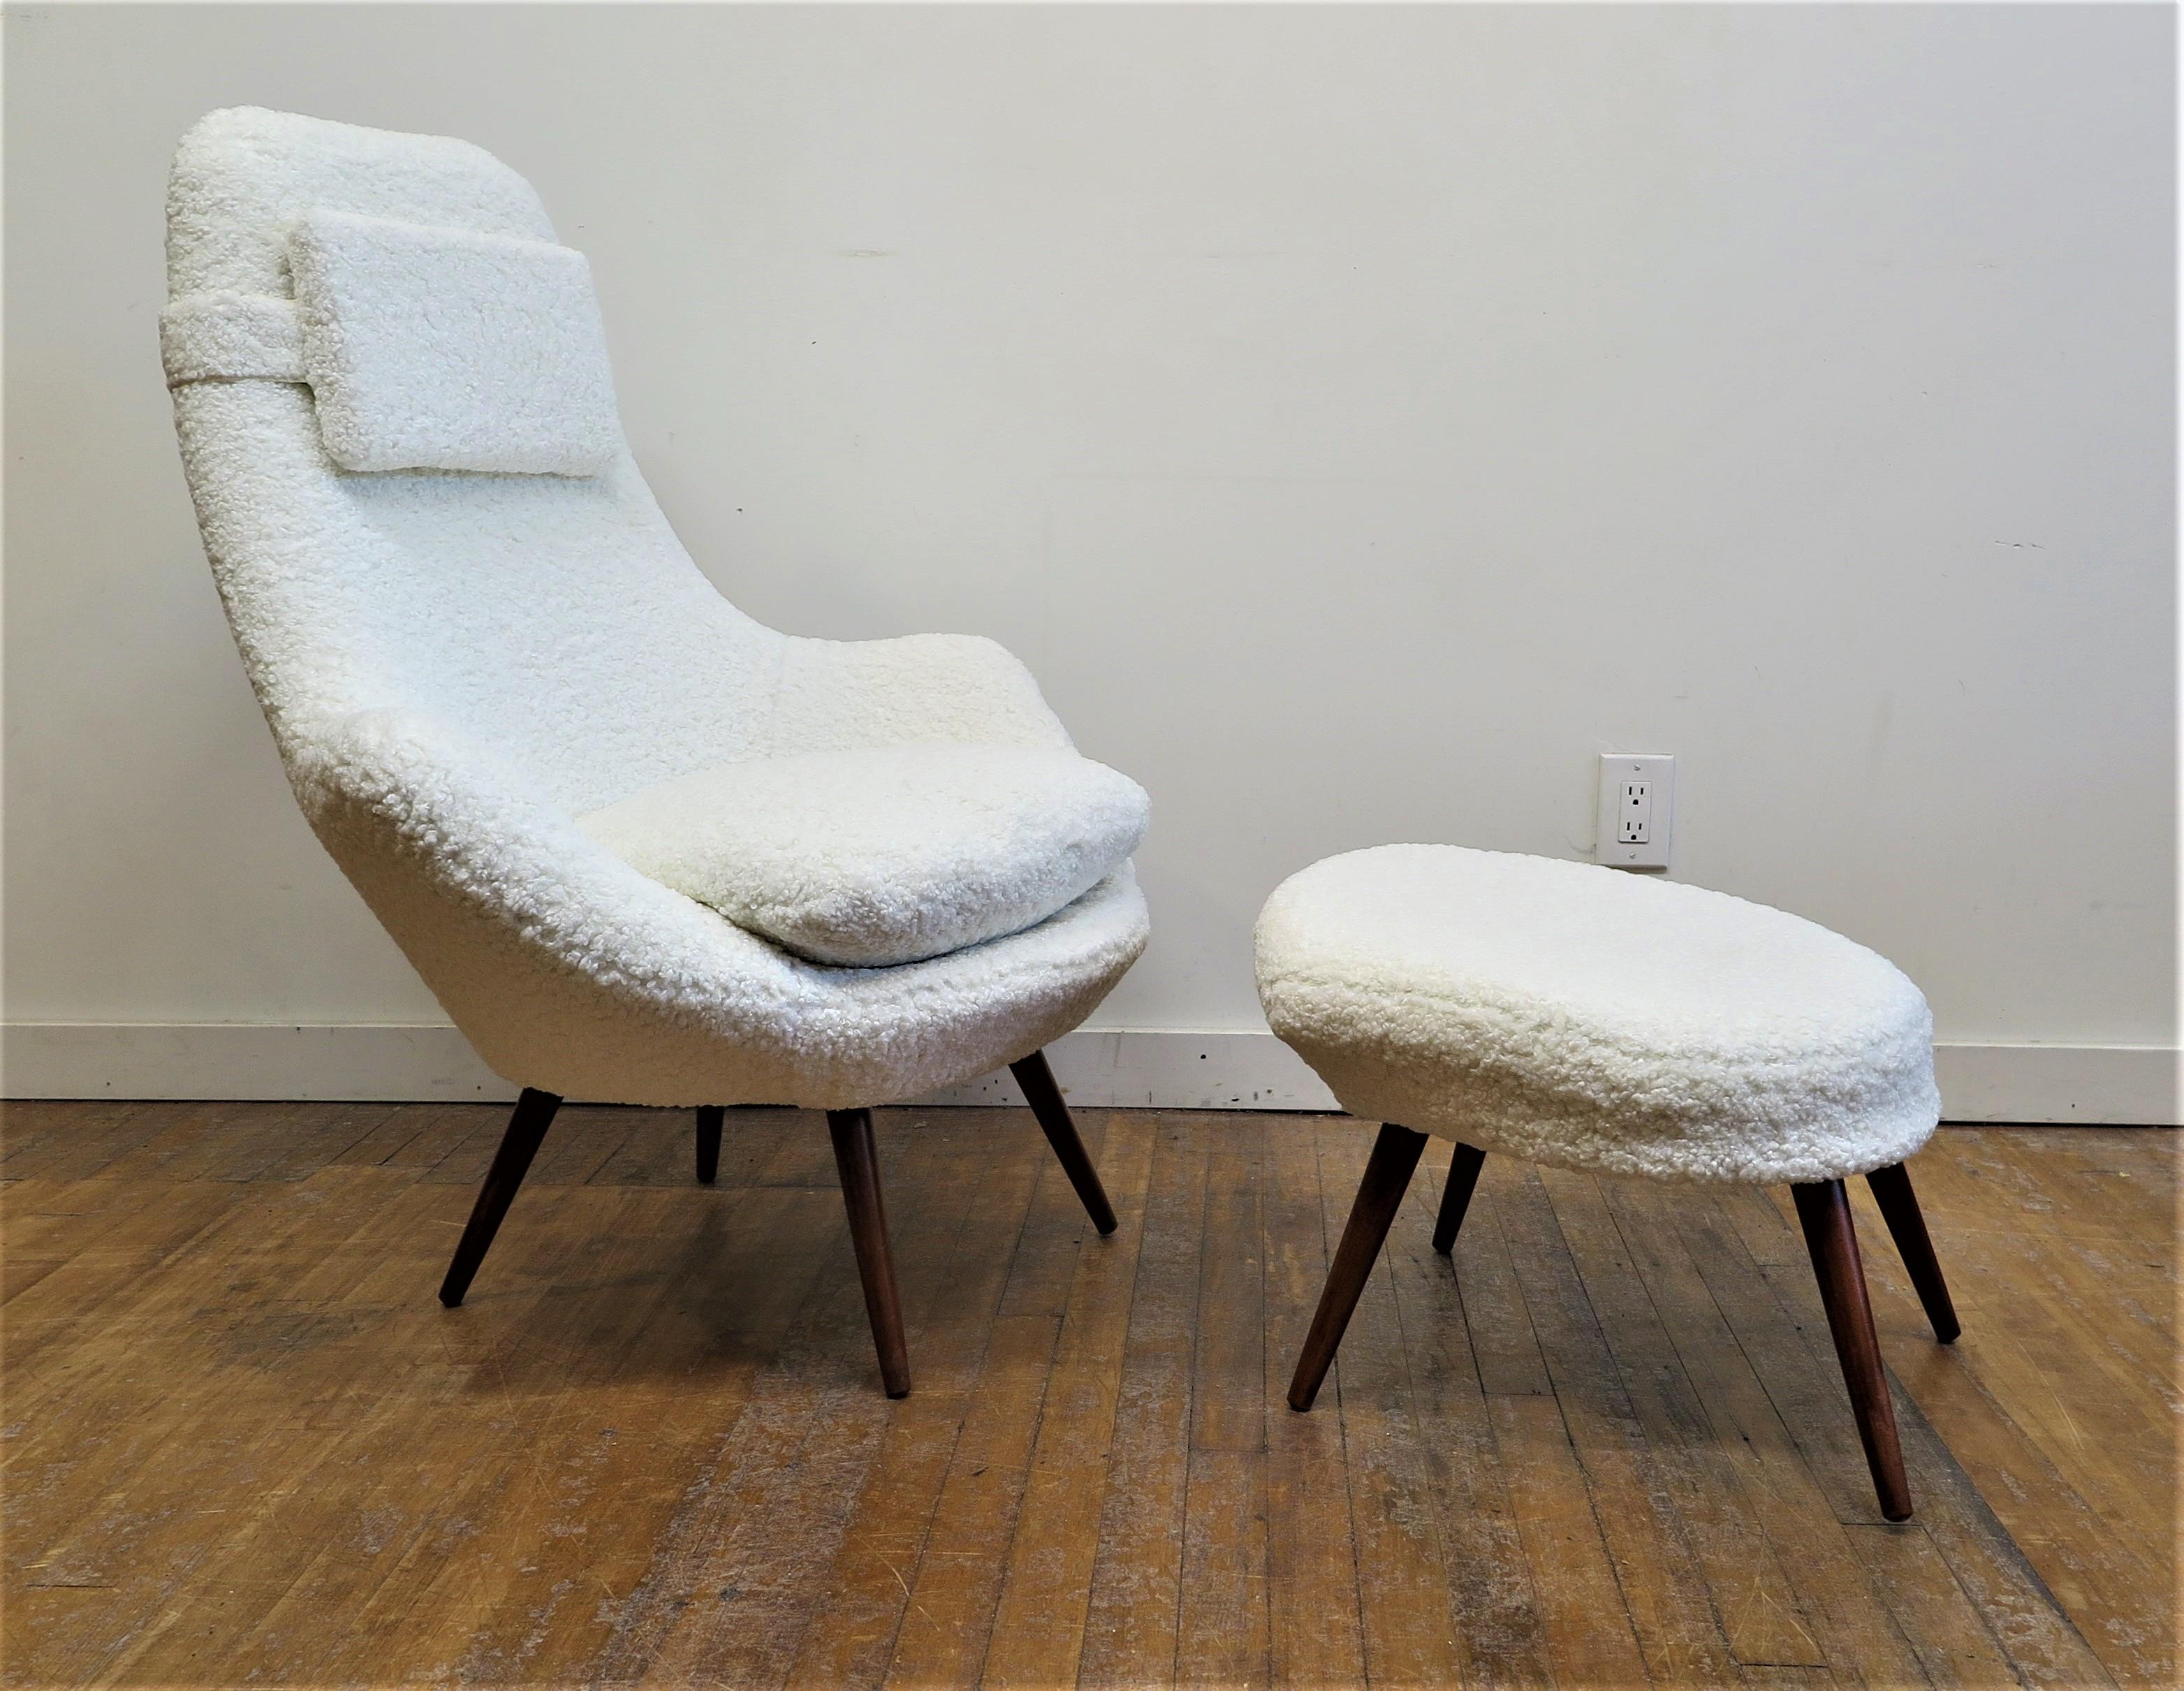 Mid Century Danish Modern Lounge Chair with ottoman. Danish modern cloud lounge chair from 1960's. Sculpted open arm chair on splayed teak legs with sculpted matching ottoman covered in faux fur shearling. In very good condition both the chair and